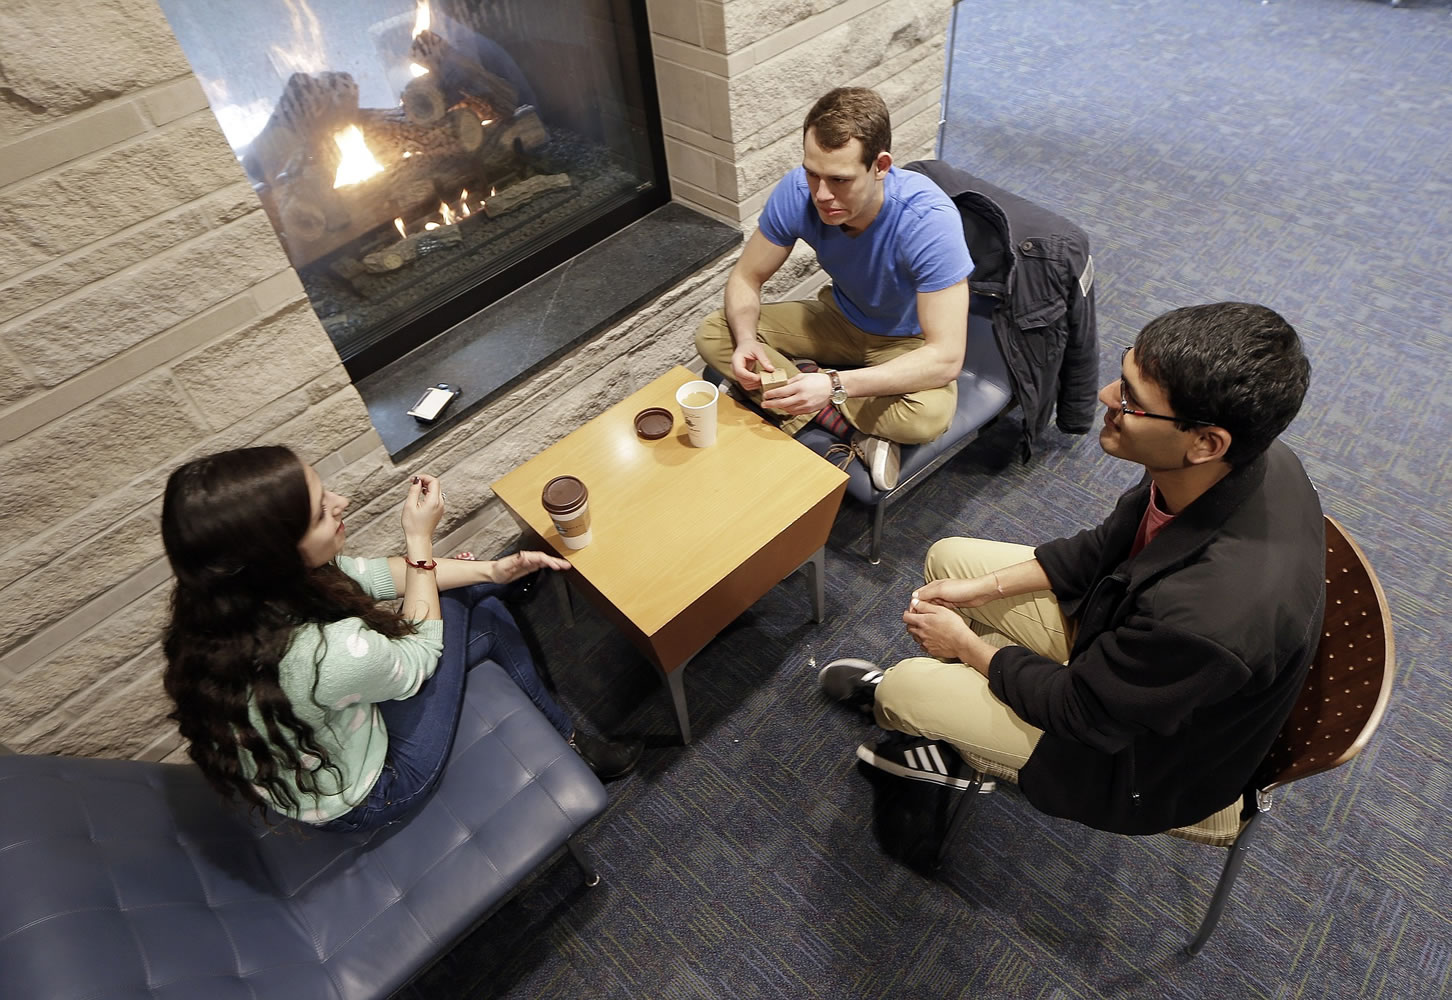 Vivek Shah, right, a sophomore resident advisor at Vanderbilt University, talks with friends Samara Lieberman, left, a senior from Detroit, and Tyler Shull, center, a sophomore from Chapel Hill, N.C., by a fireplace in the great room in the Warren College and Moore College section of the Vanderbilt campus in Nashville, Tenn.  Vanderbilt is one of a small but growing number of U.S.